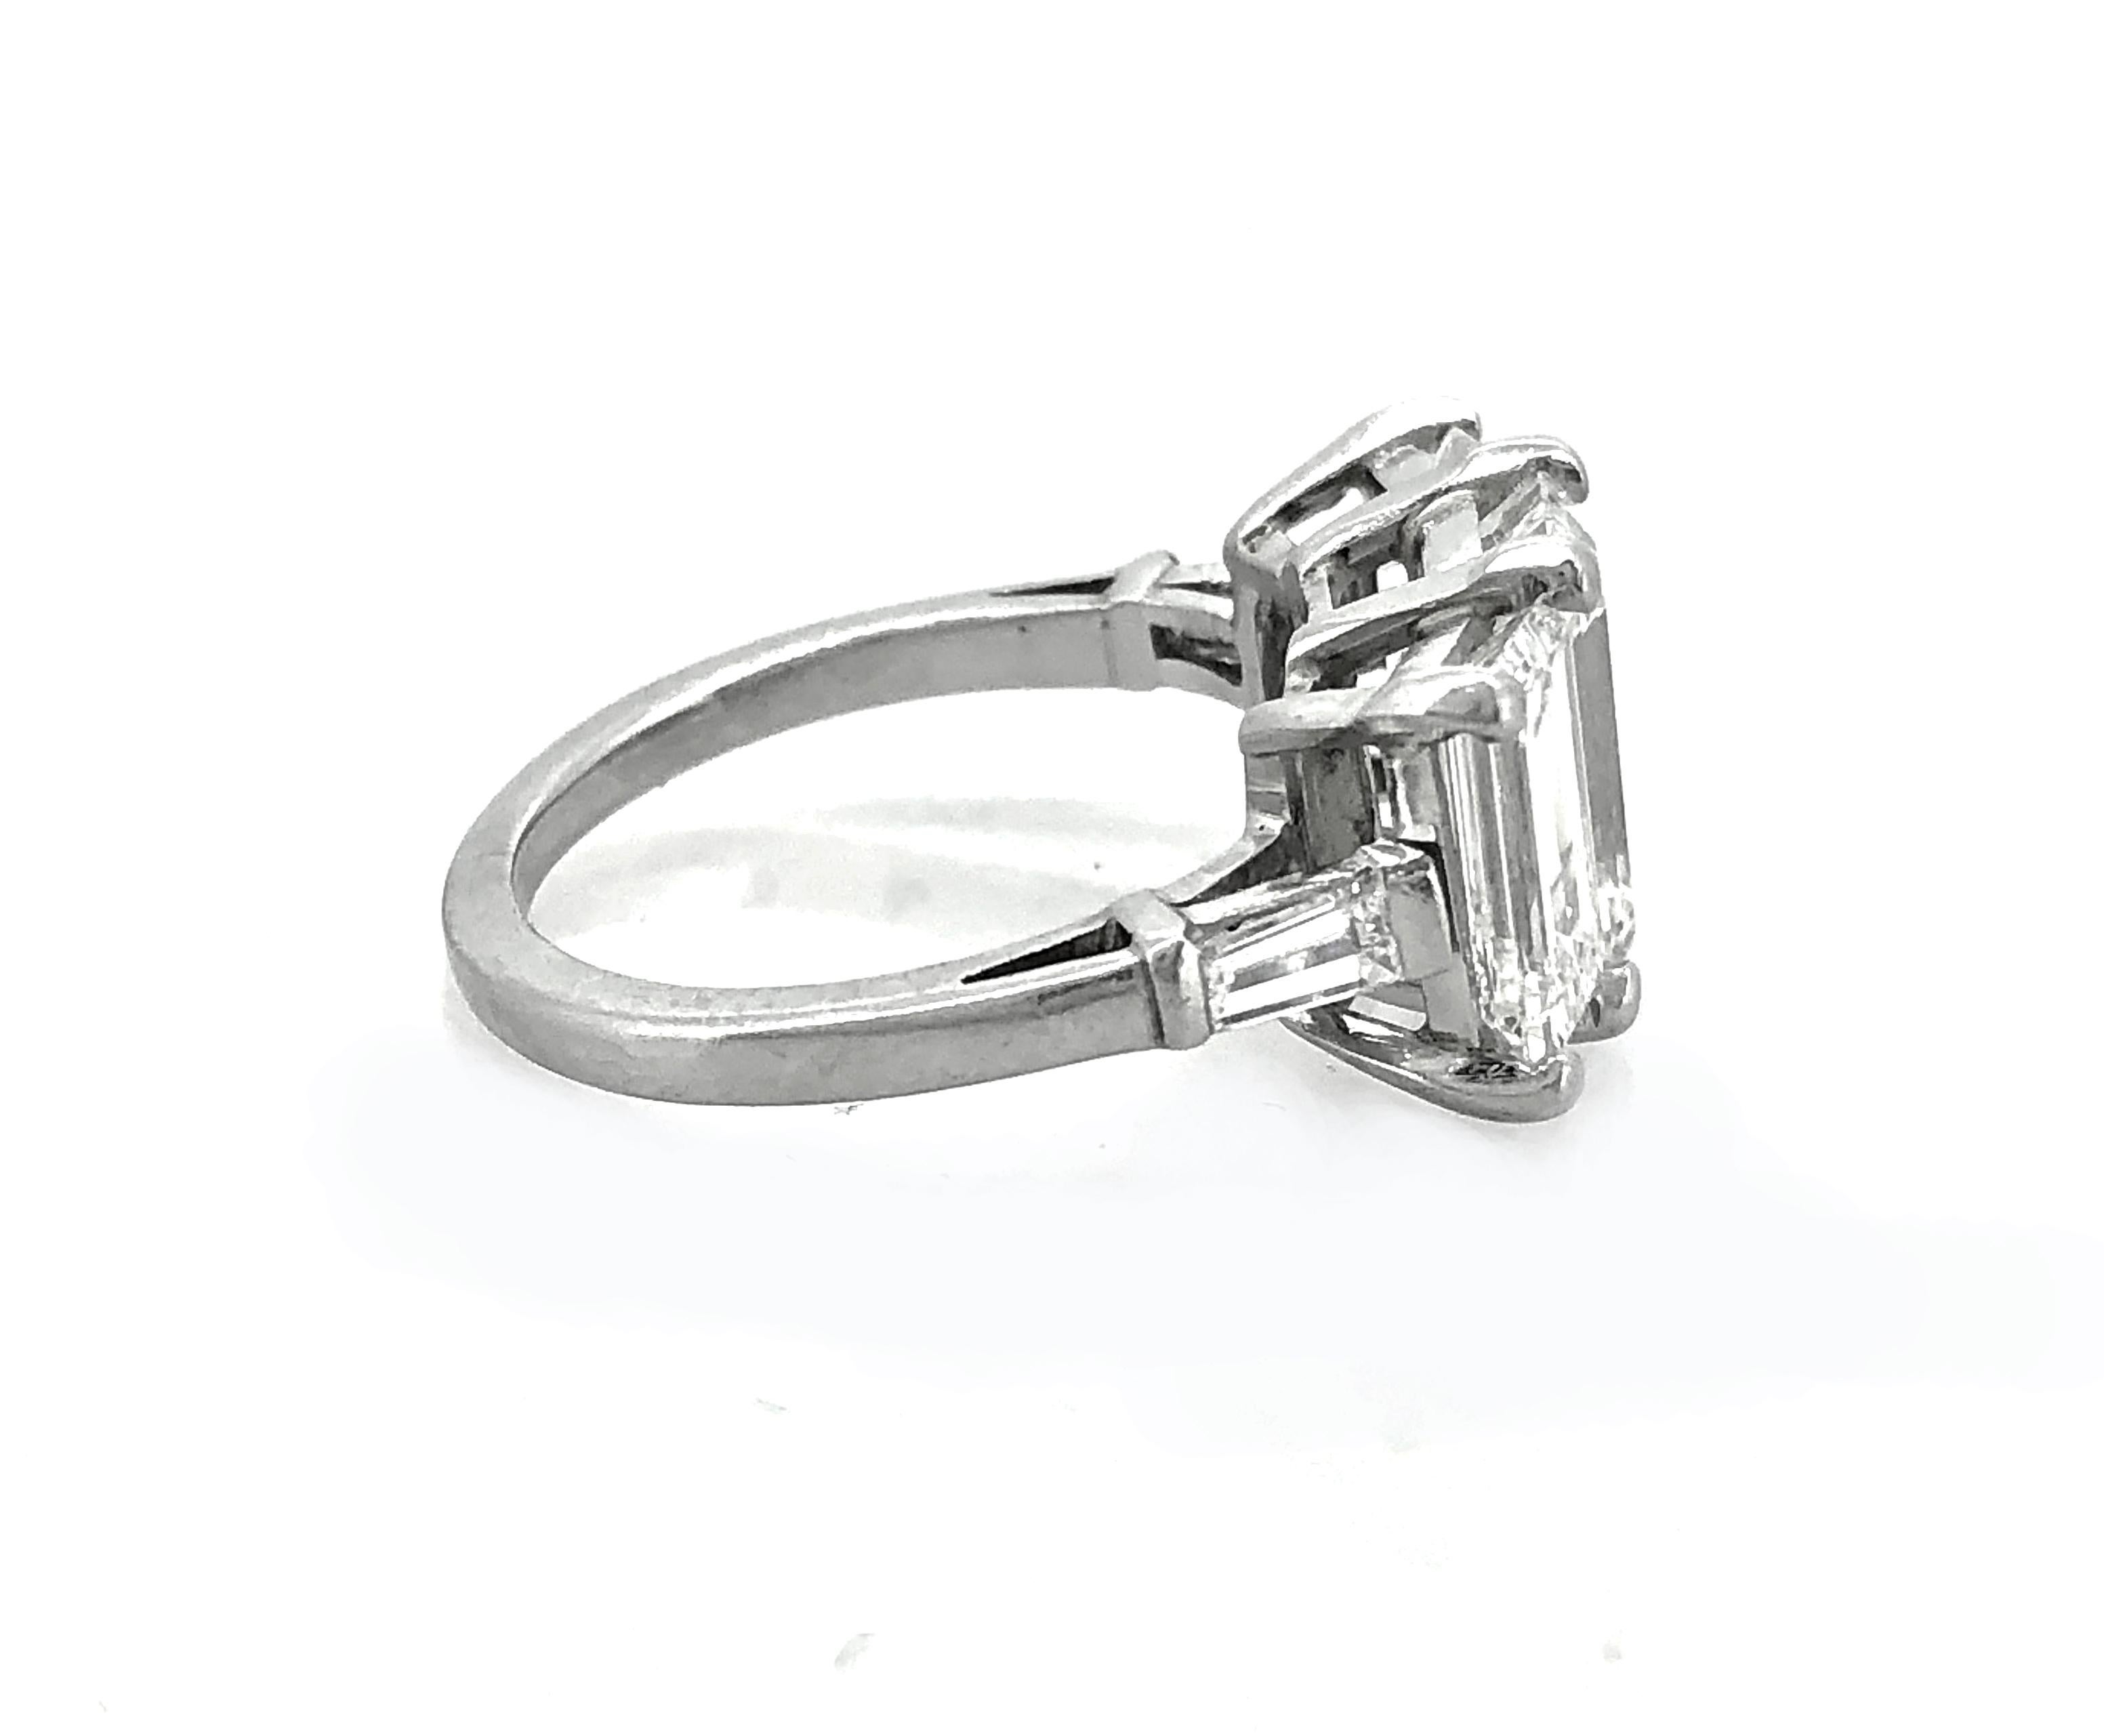 An exquisite 3-stone emerald cut diamond Estate engagement or fashion ring featuring a center emerald cut diamond weighing approximately 2.65ct. with VVS2 clarity and I color. There are two emerald cut diamonds weighing approximately 1.25ct. apx.